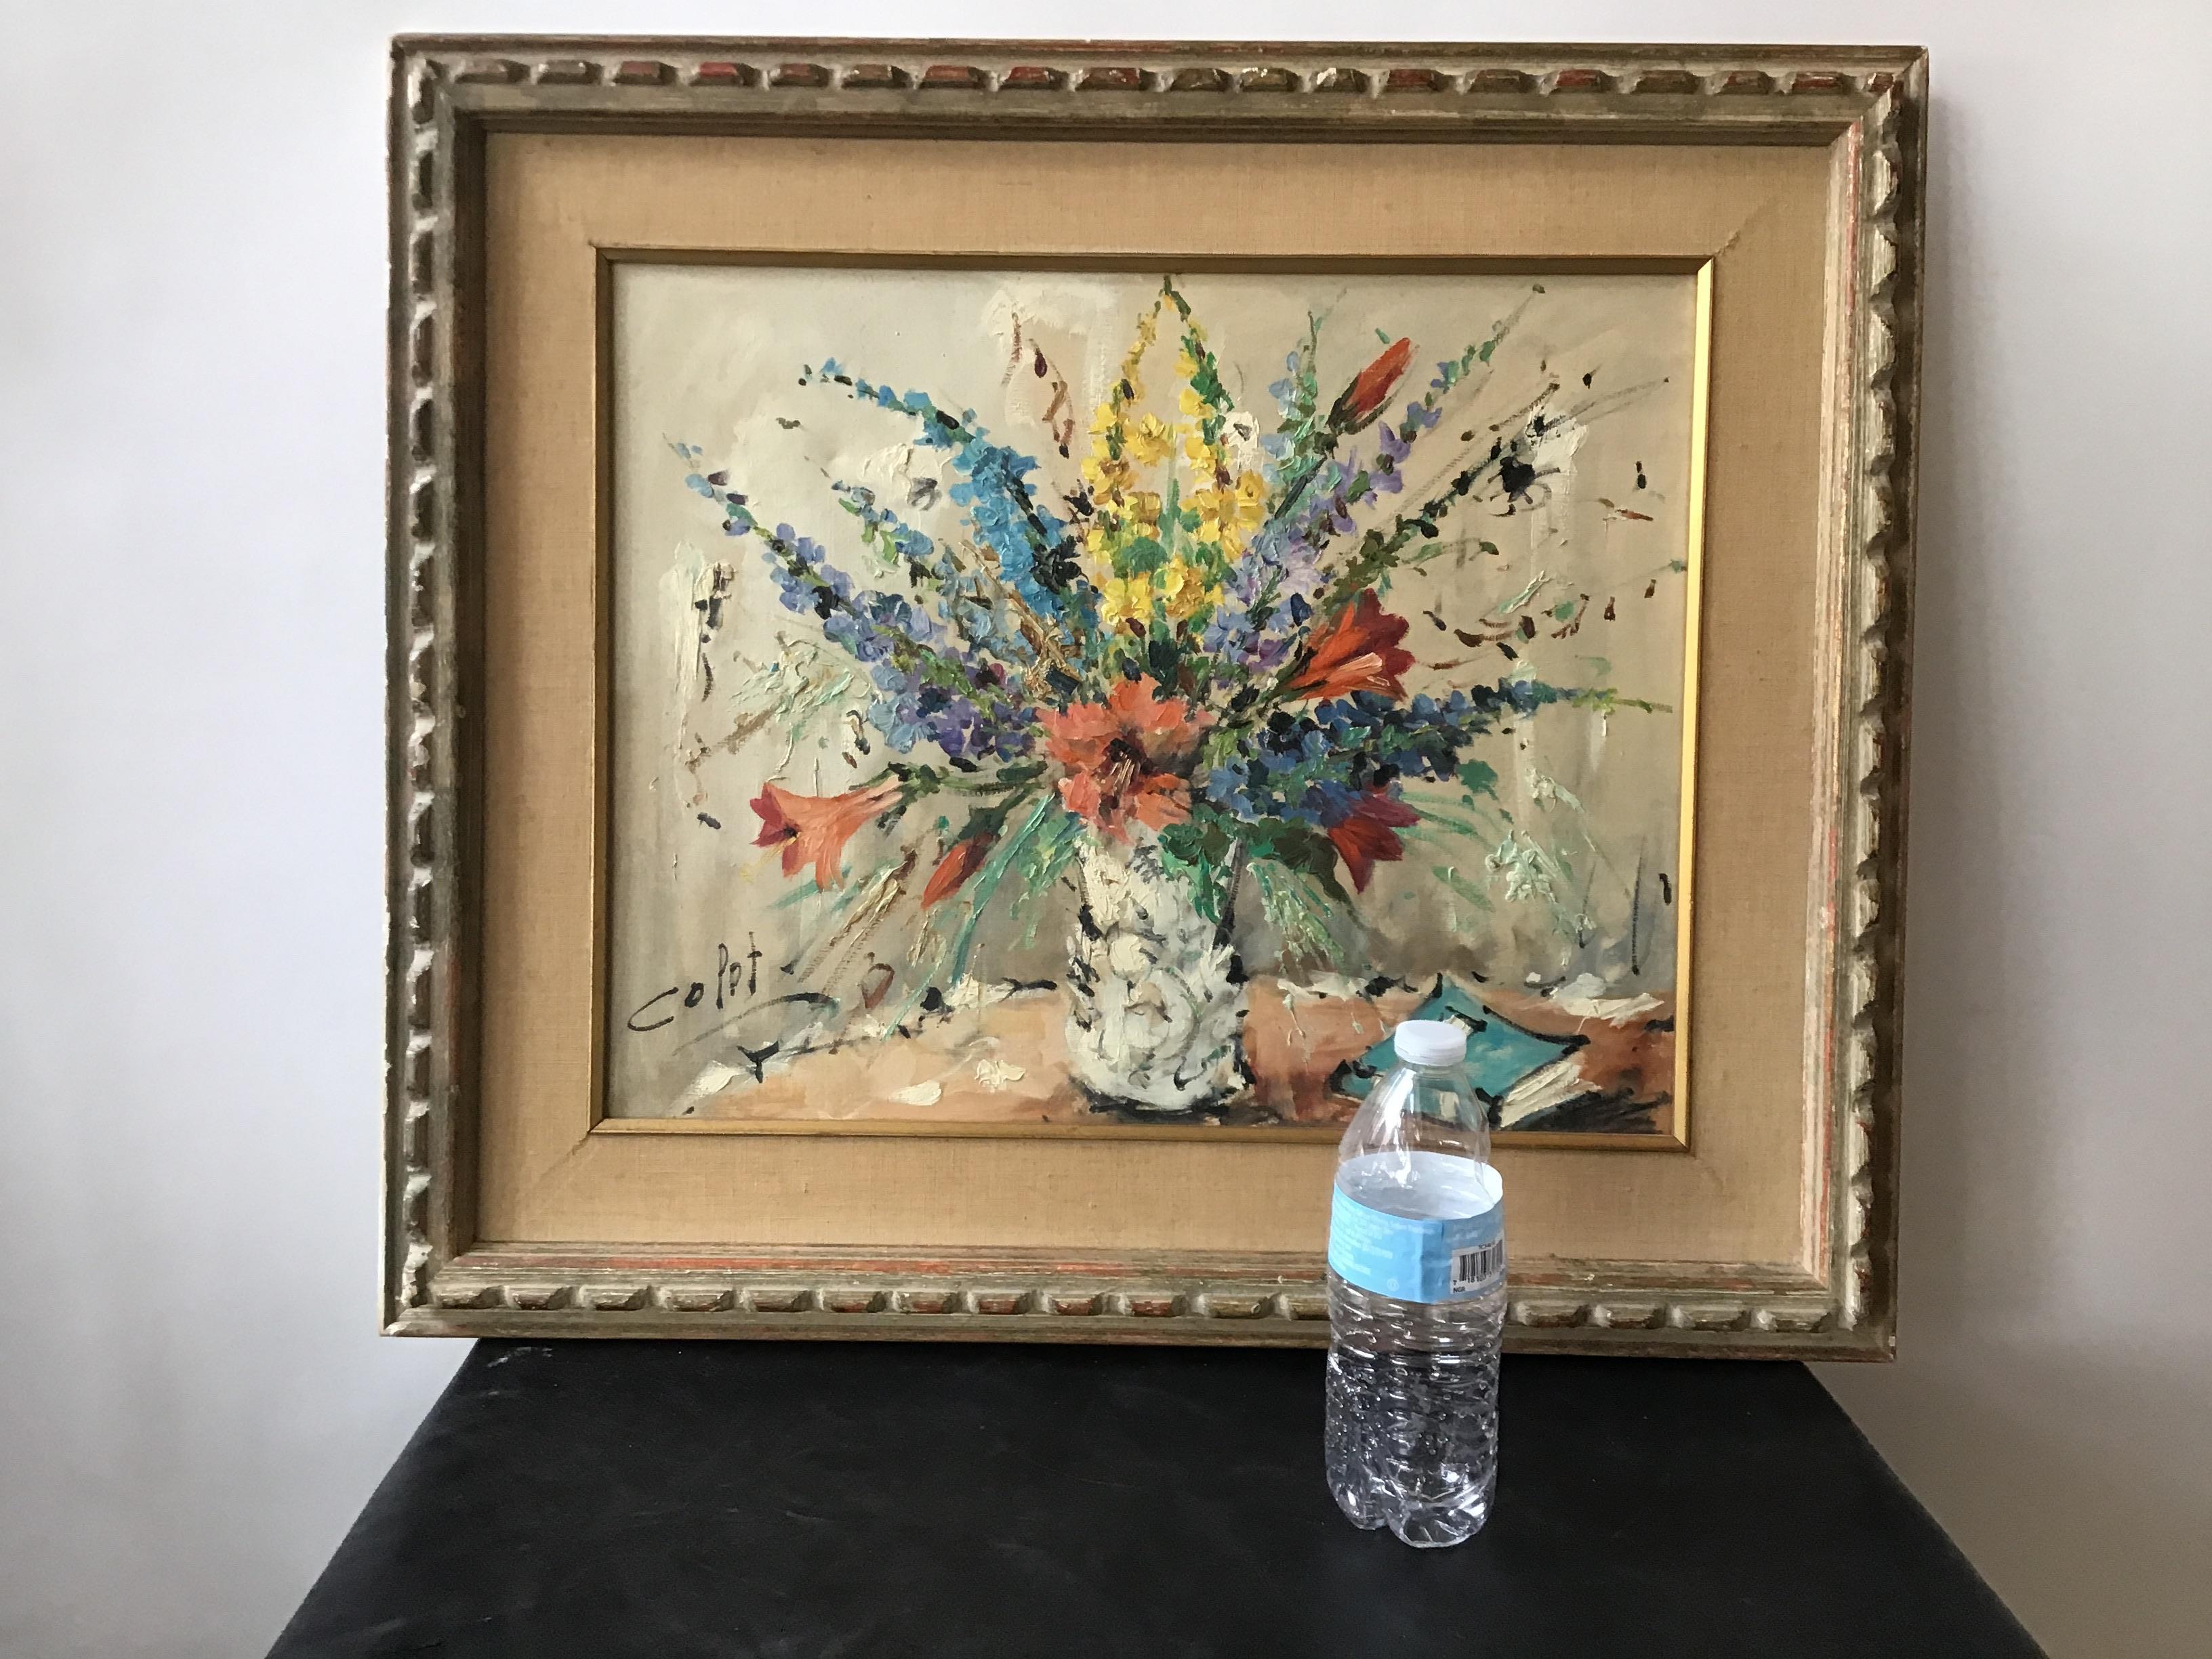 1950s oil on canvas painting of floral arrangement in a wood frame. Signed.